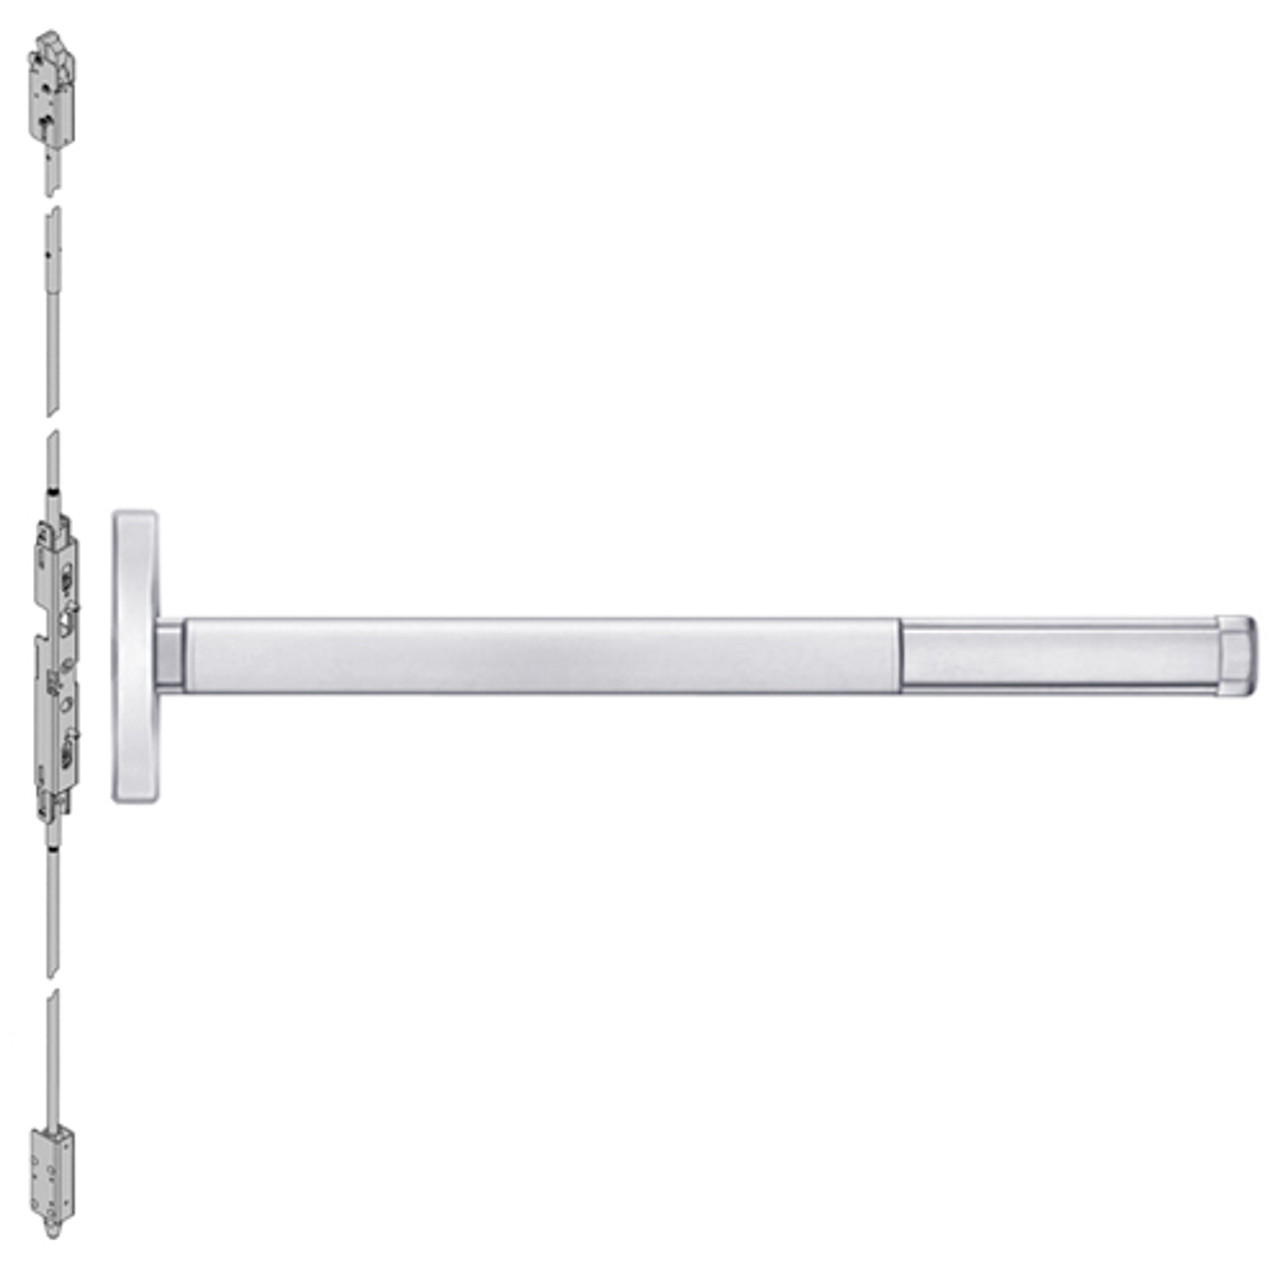 MLRFL2601-625-48 PHI 2600 Series Fire Rated Concealed Vertical Rod Exit Device with Motorized Latch Retraction Prepped for Cover Plate in Bright Chrome Finish